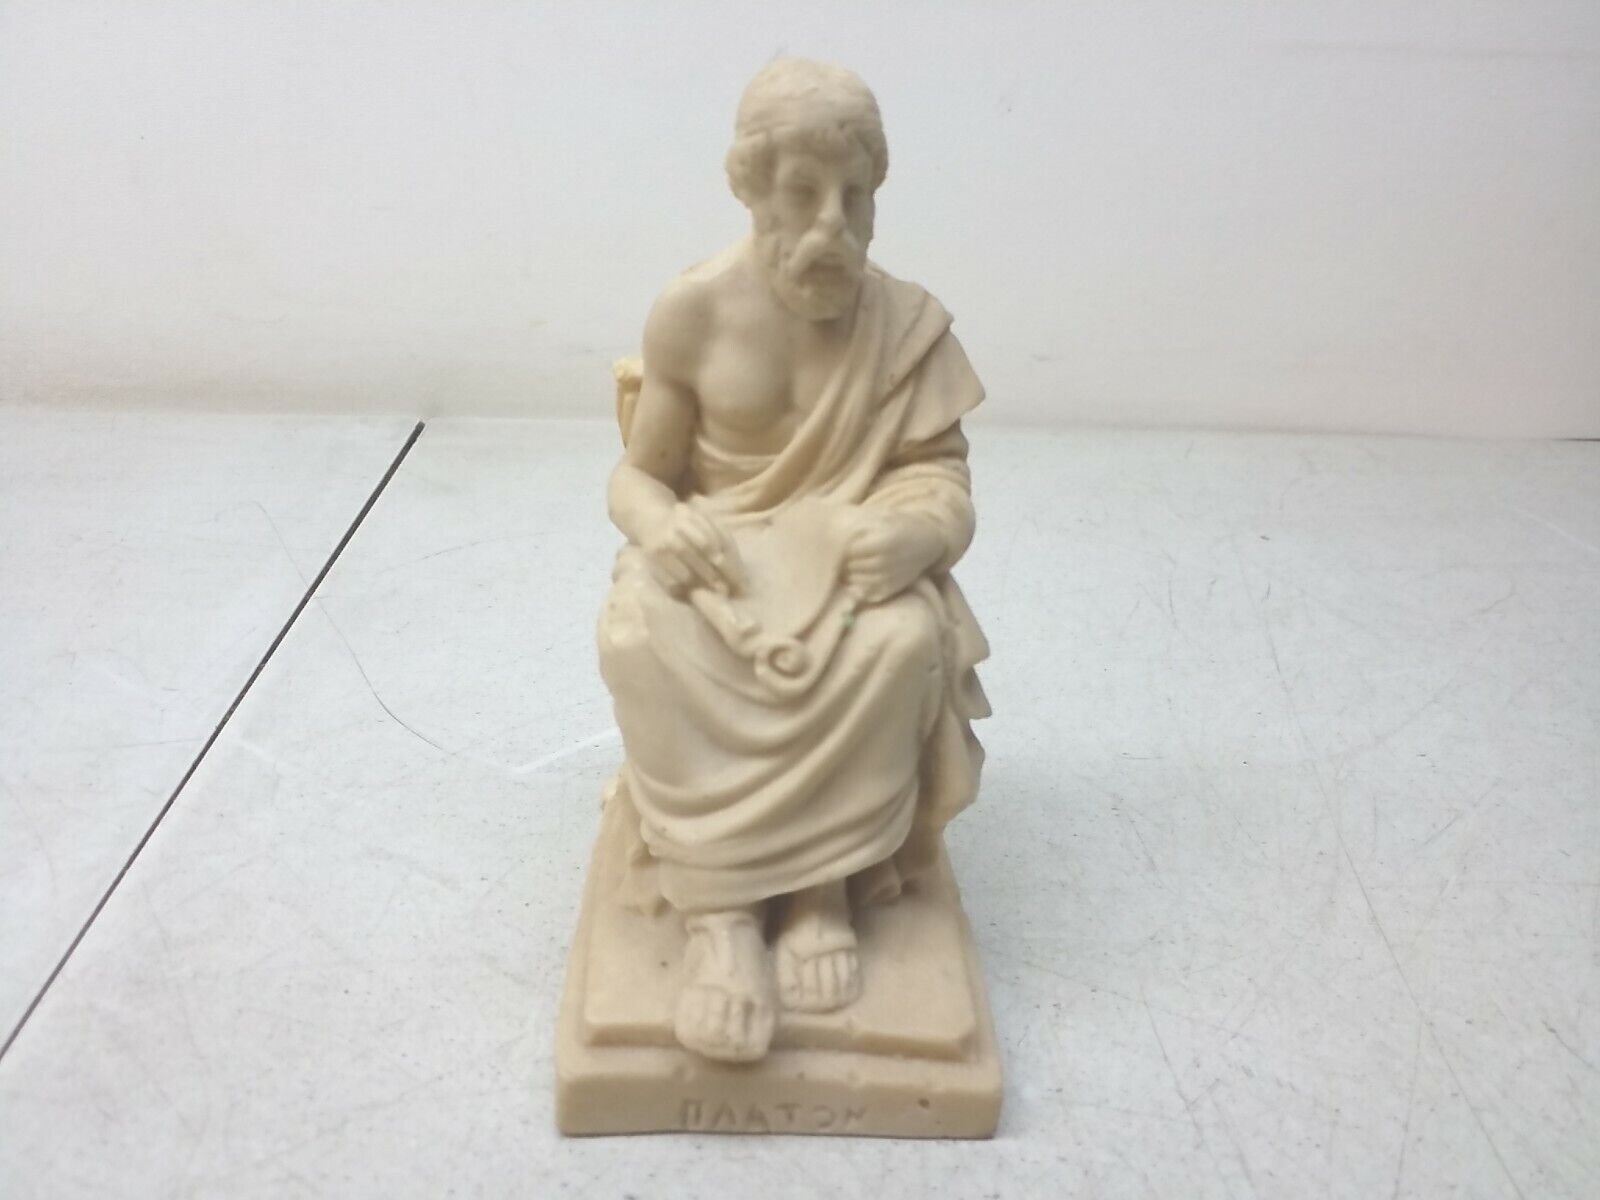 Hand Carved Plato Statue Figurine Souvenir Of Greece Vintage Collectible 